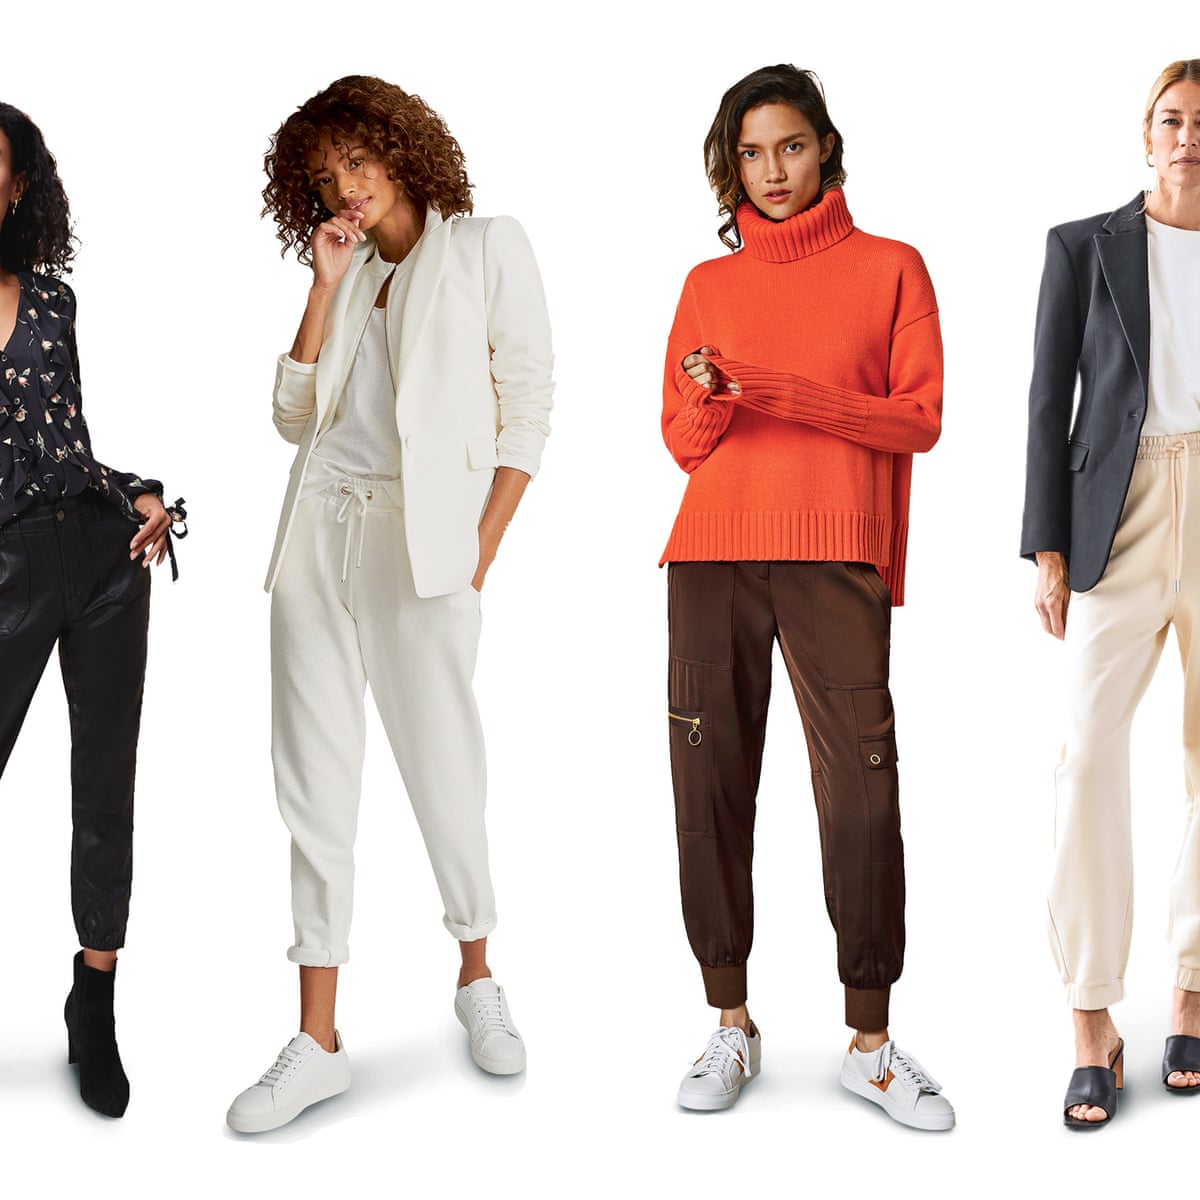 Trend watch: how sweatpants became a hot fashion look, Fashion